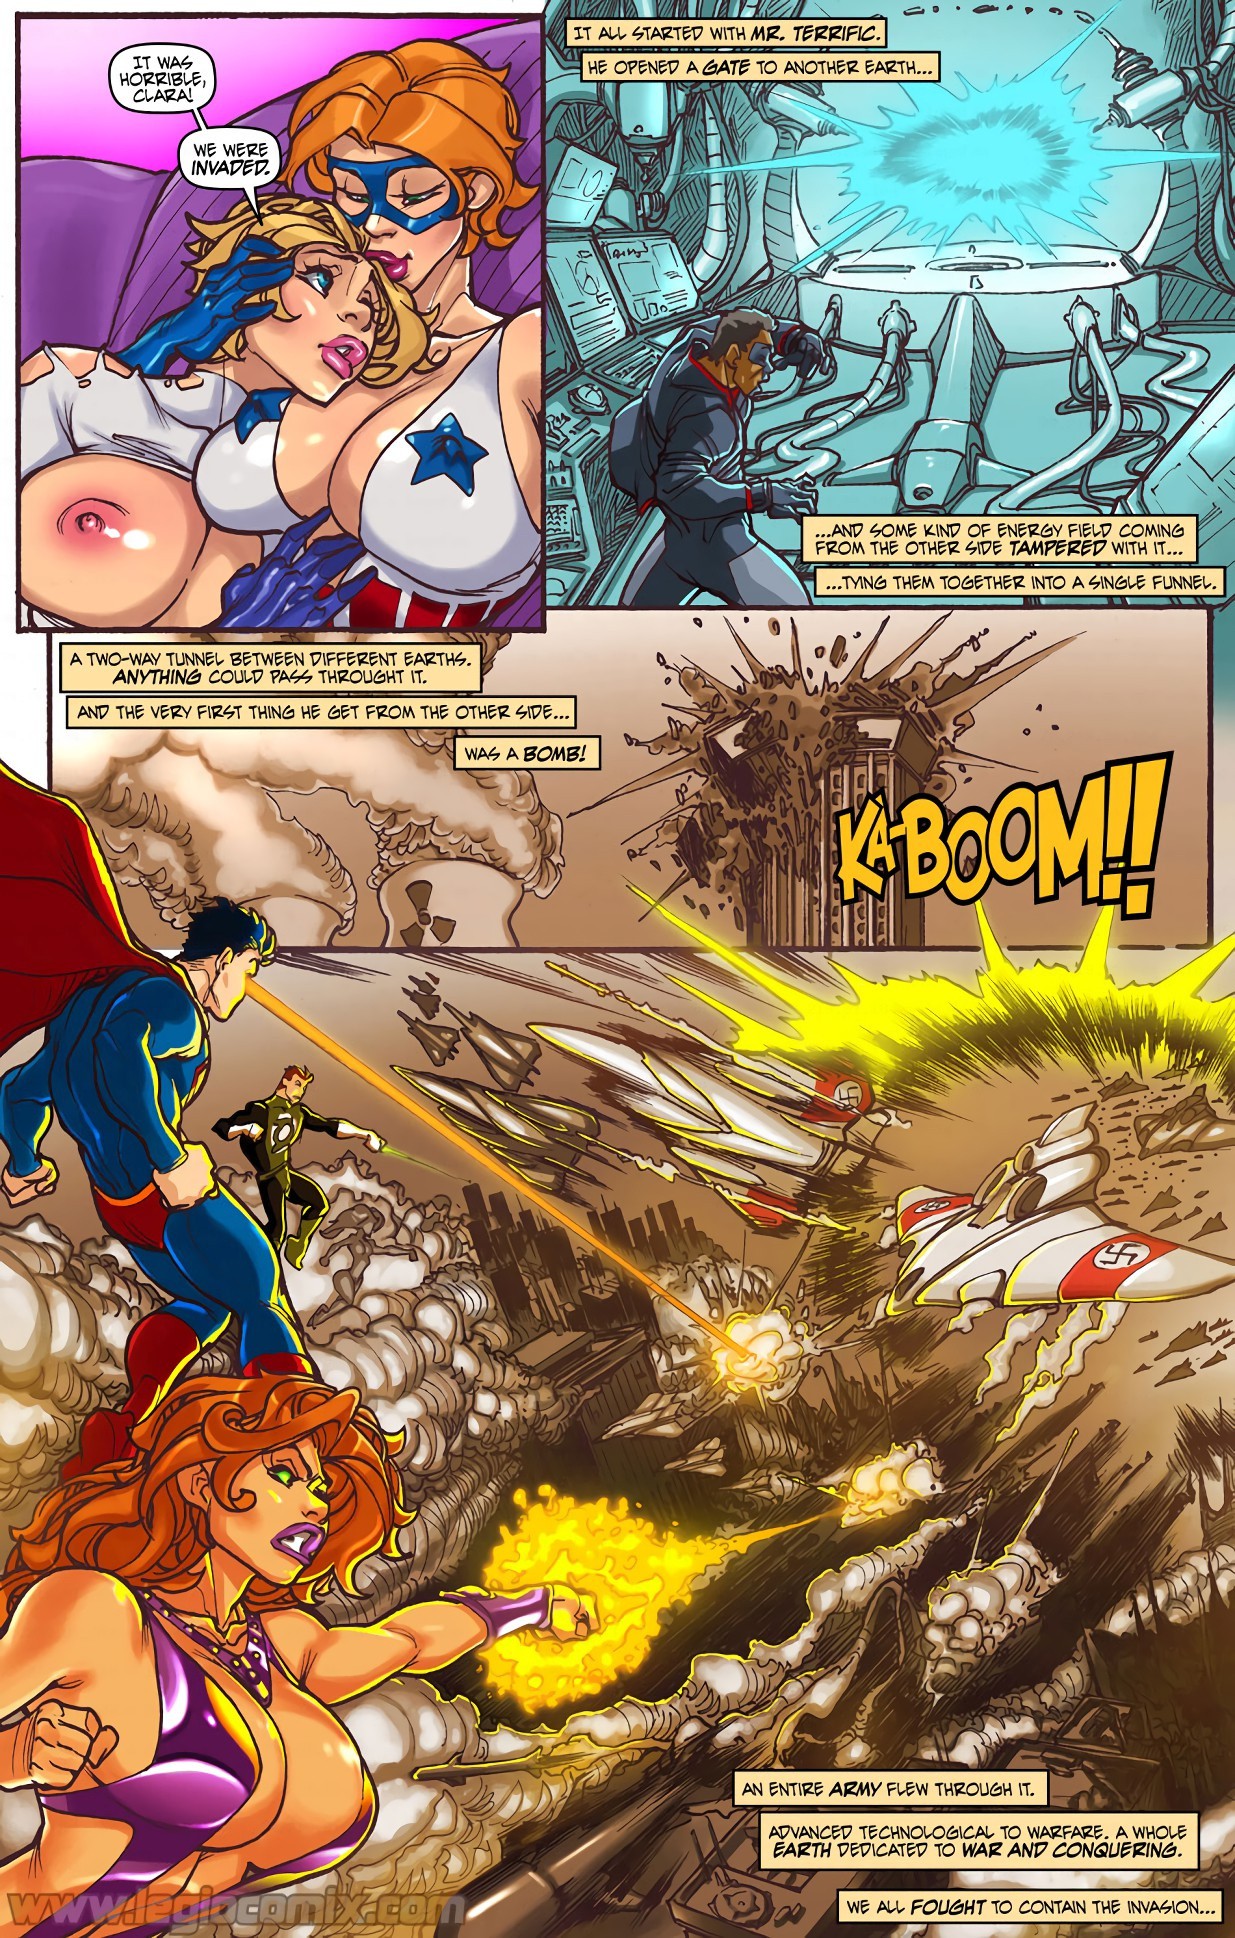 Power & Thunder - Another Worlds porn comic picture 16